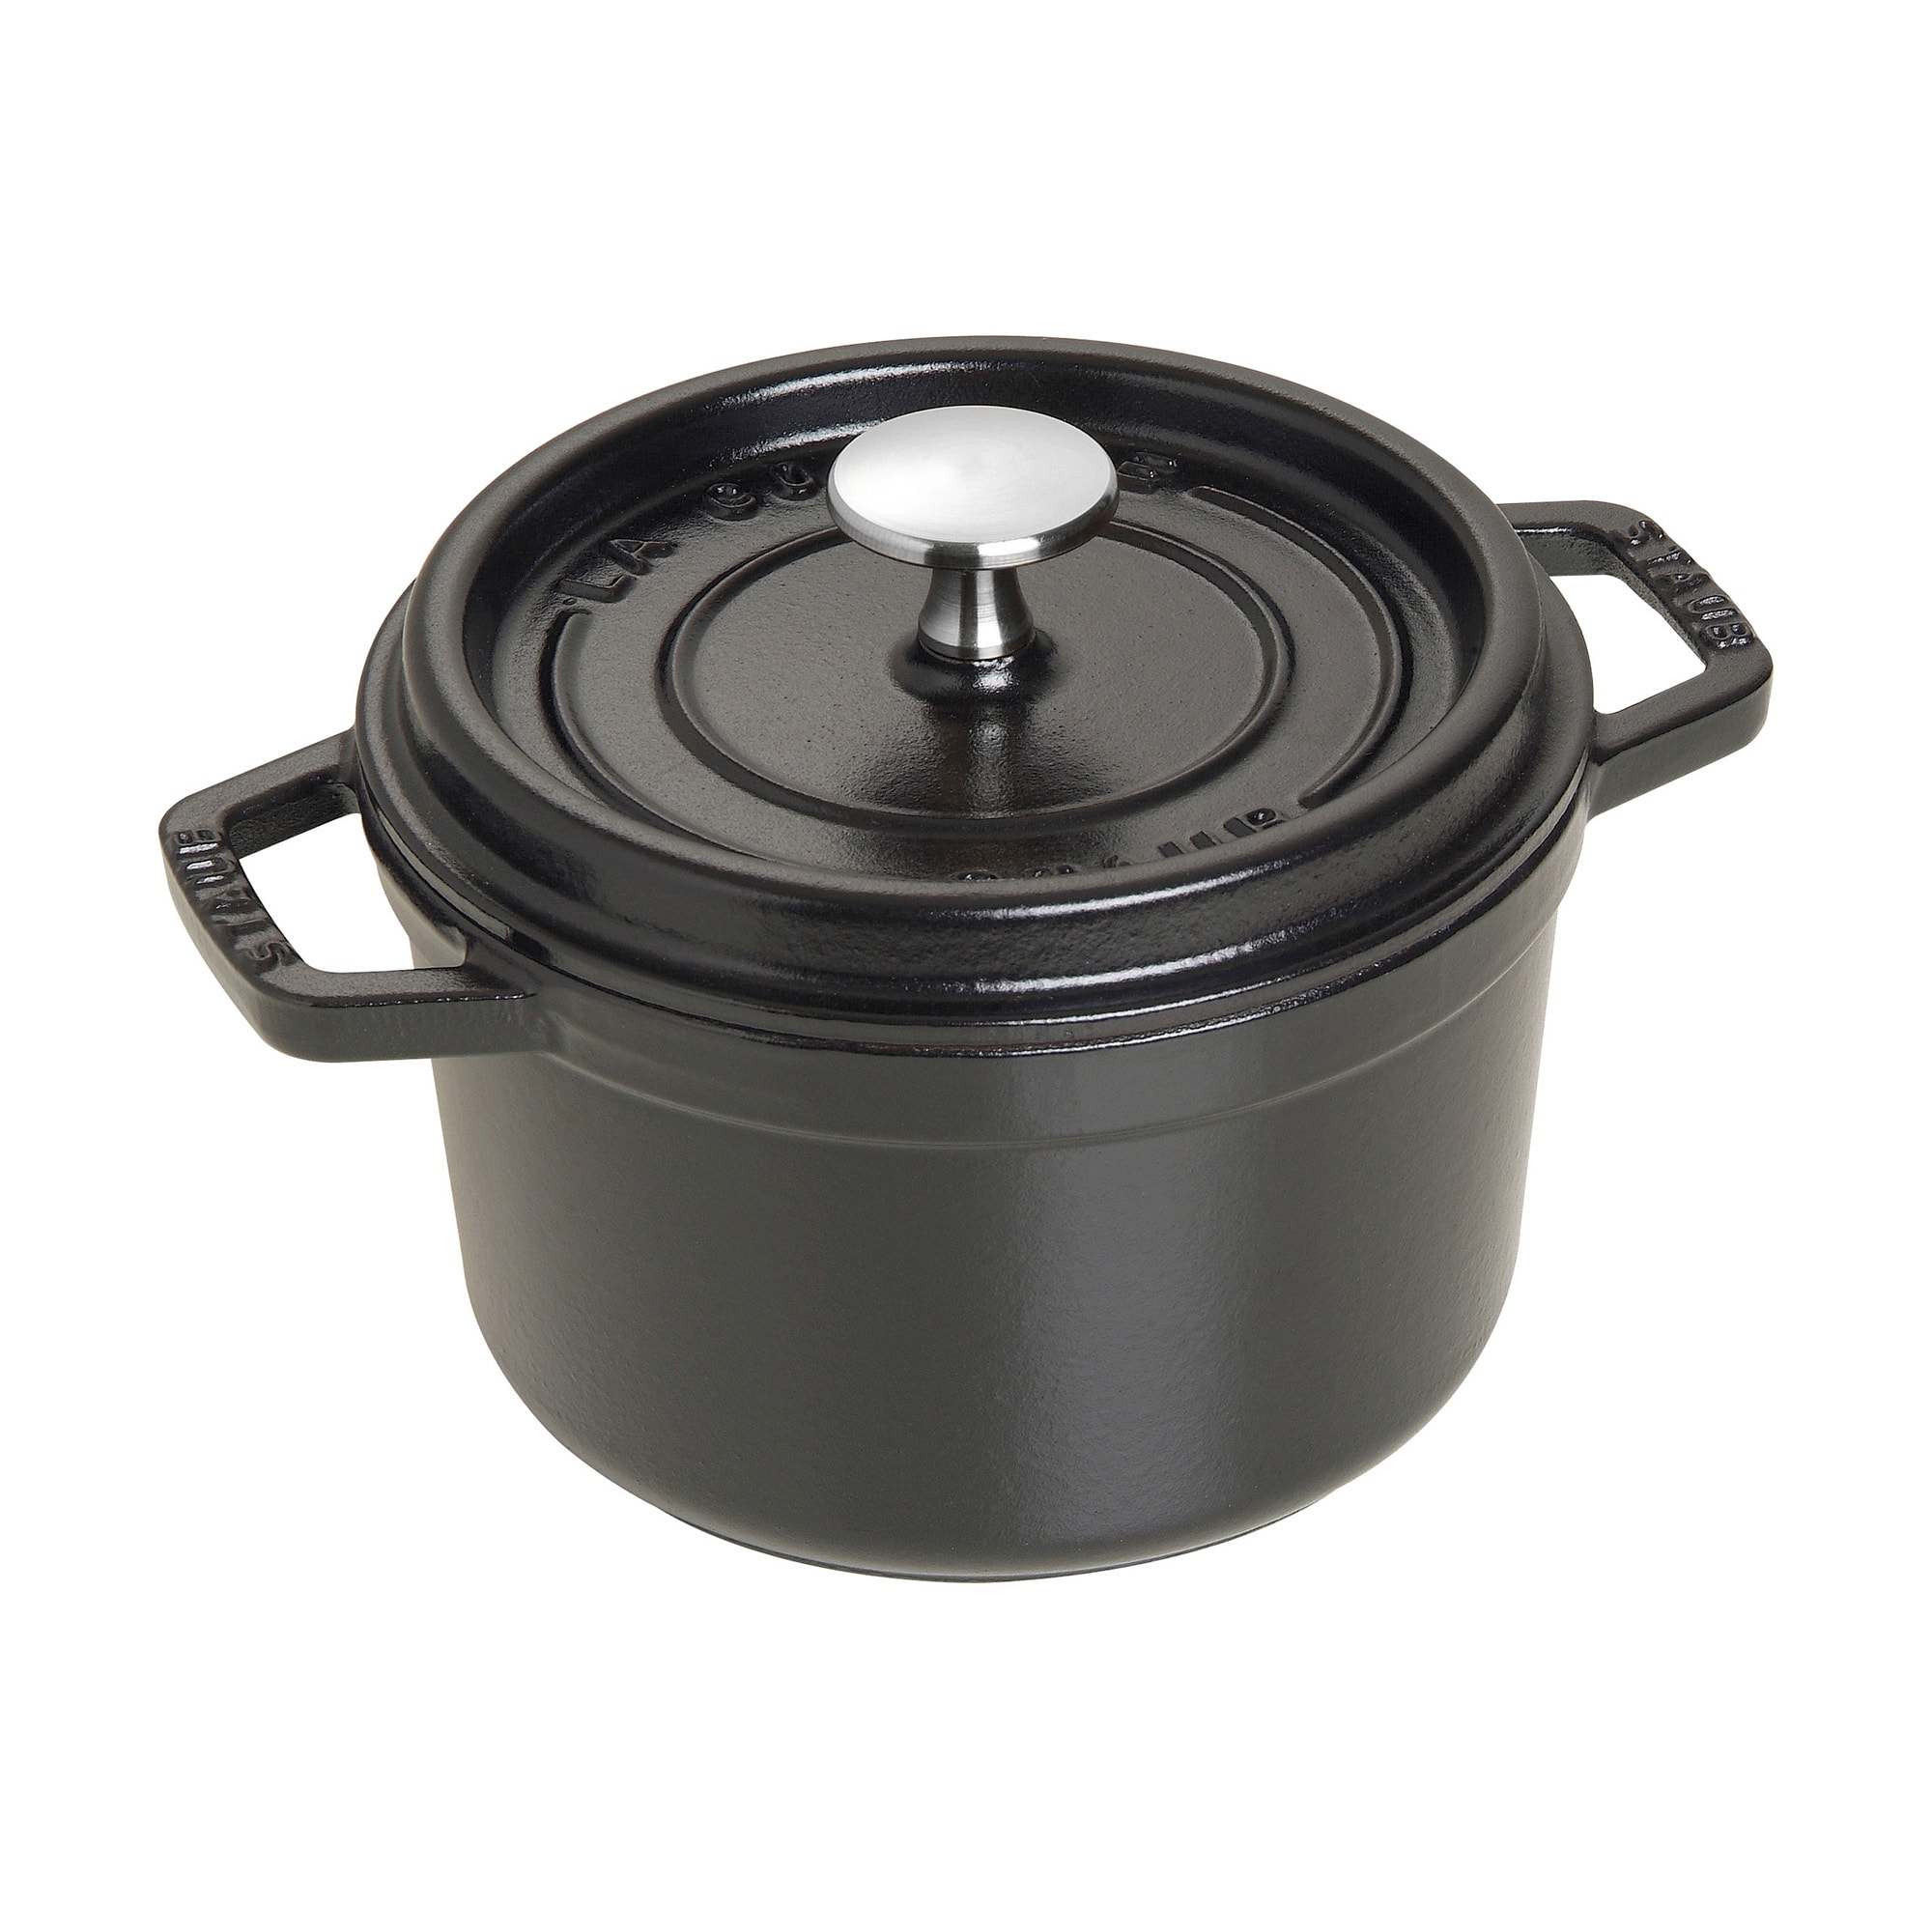 https://ak1.ostkcdn.com/images/products/is/images/direct/d3fb17835be9945ee66e2fdaeb9ff8182cd60284/Staub-Cast-Iron-1.25-qt-Round-Cocotte.jpg